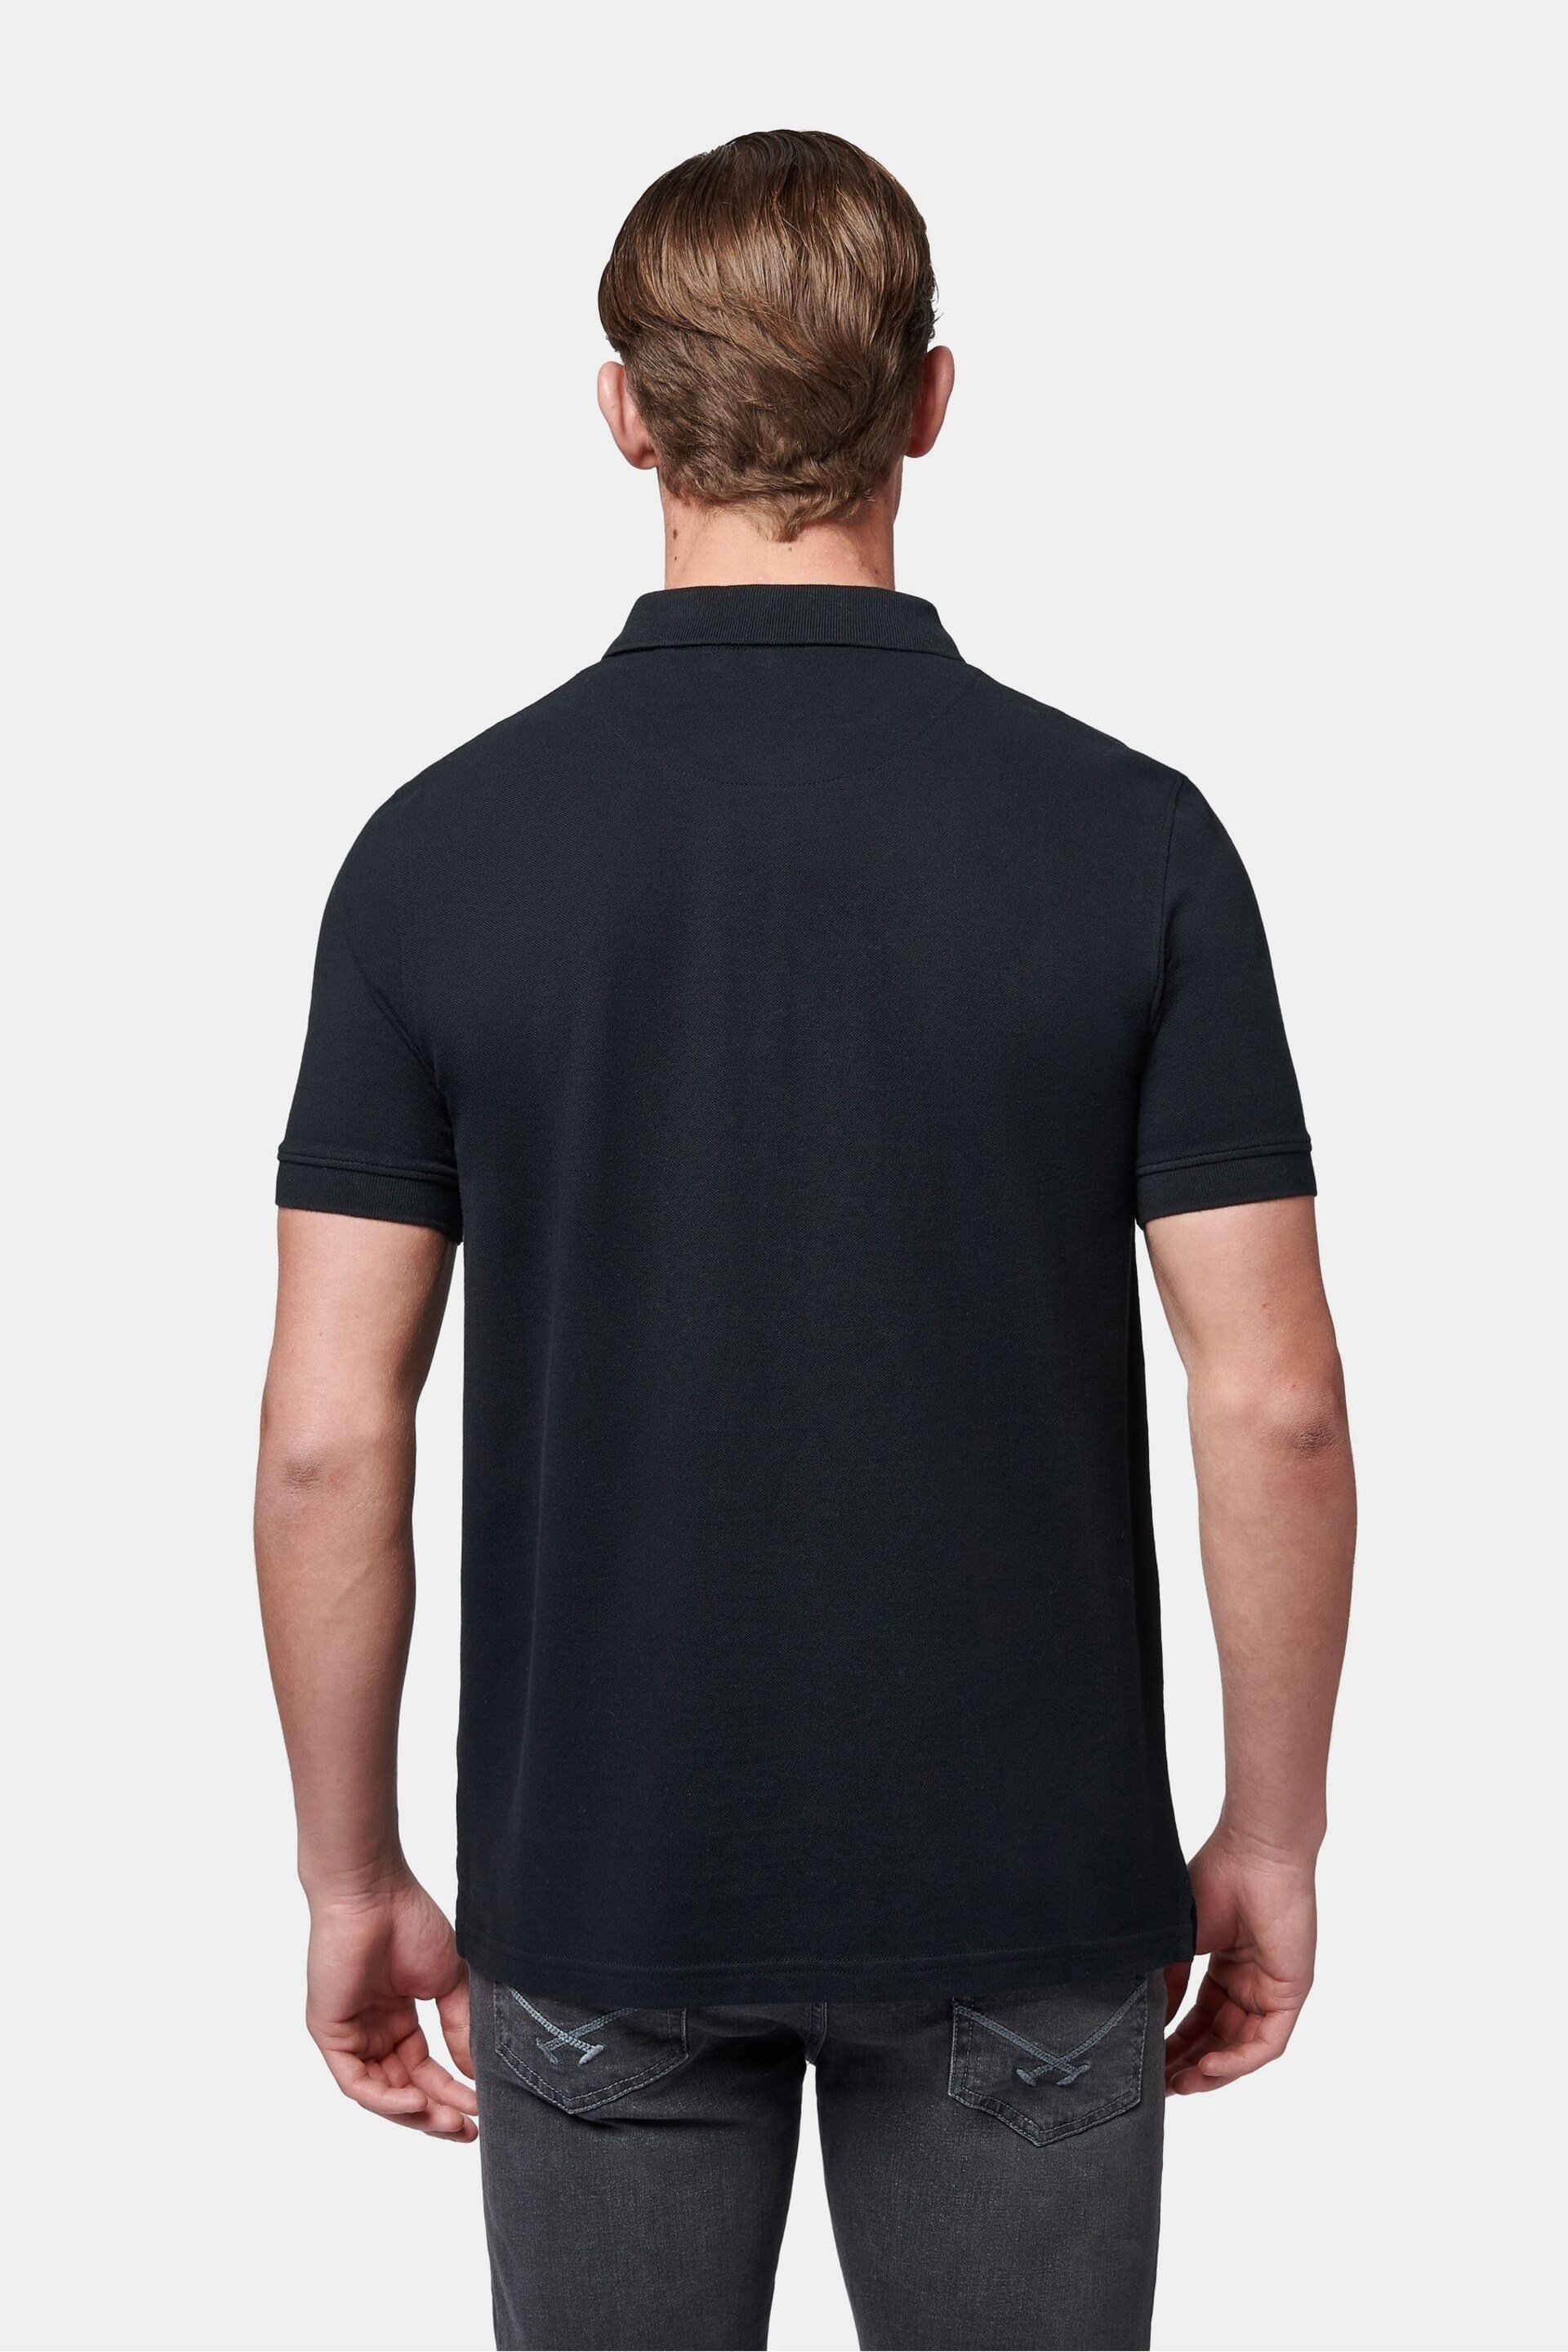 Flyers Mens Classic Fit Polo Shirt - Image 5 of 9